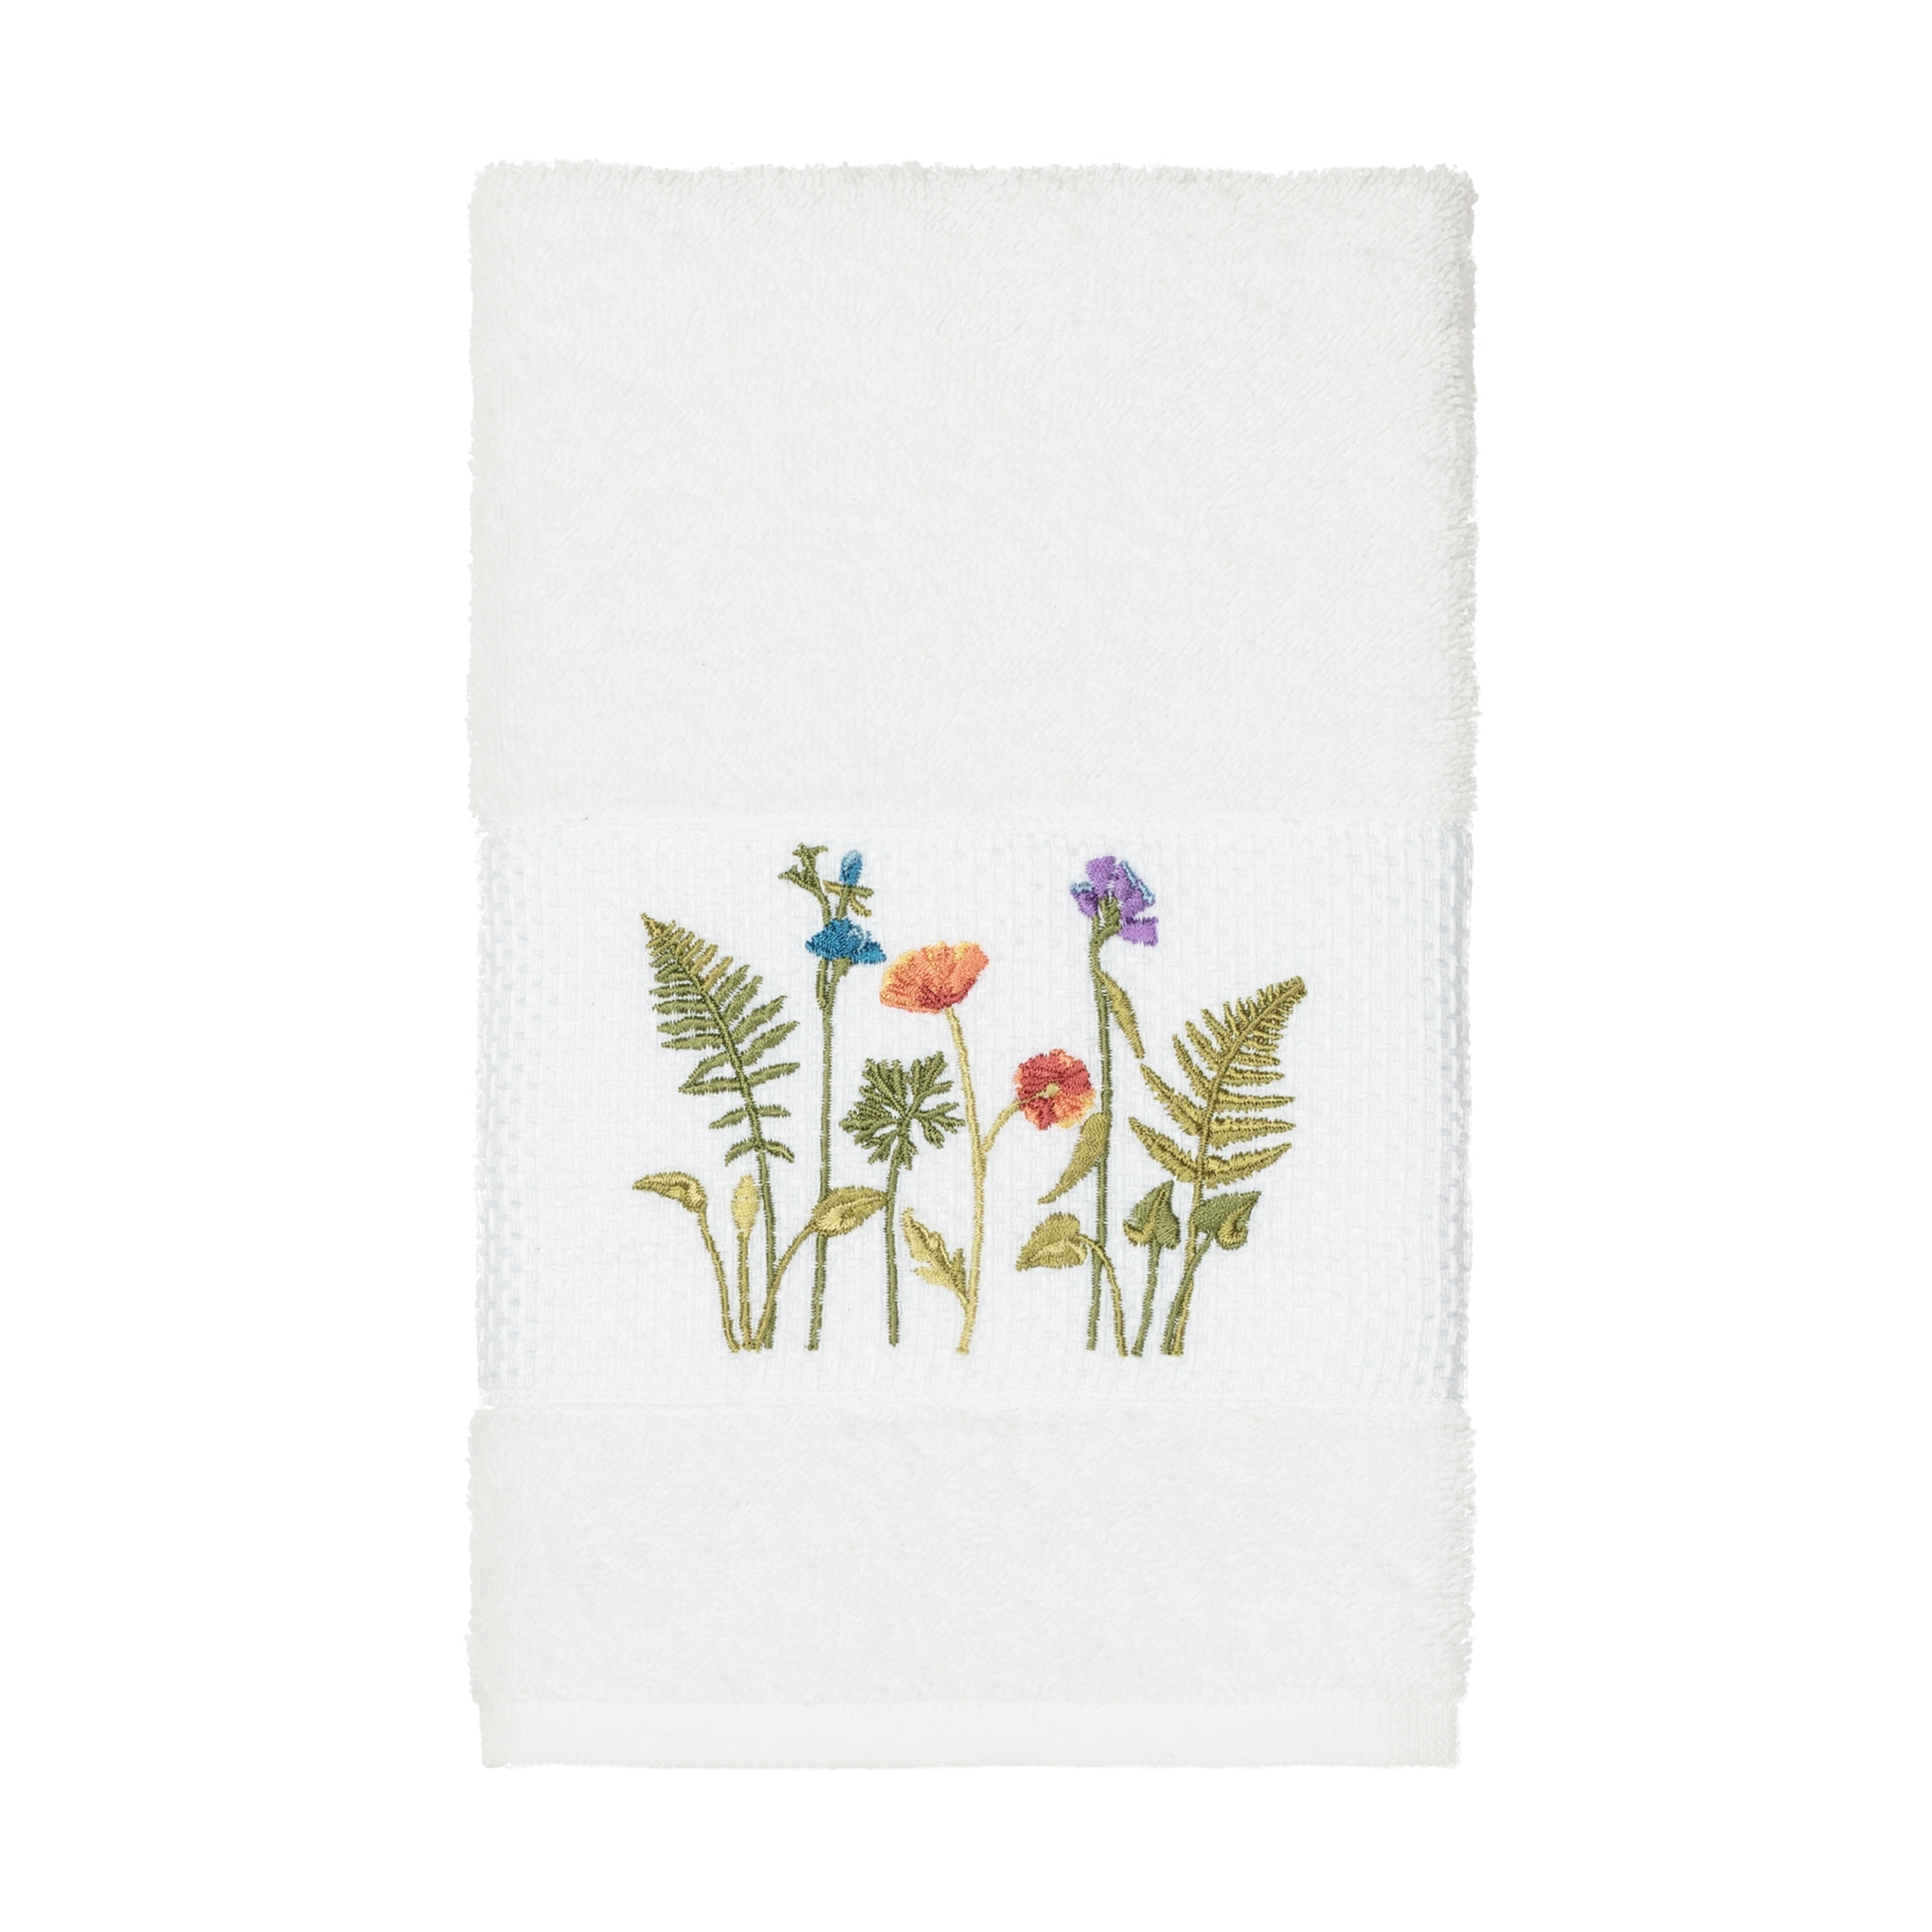 Authentic Hotel and Spa White Turkish Cotton Wildflowers Embroidered Hand  Towel - On Sale - Overstock - 21156459